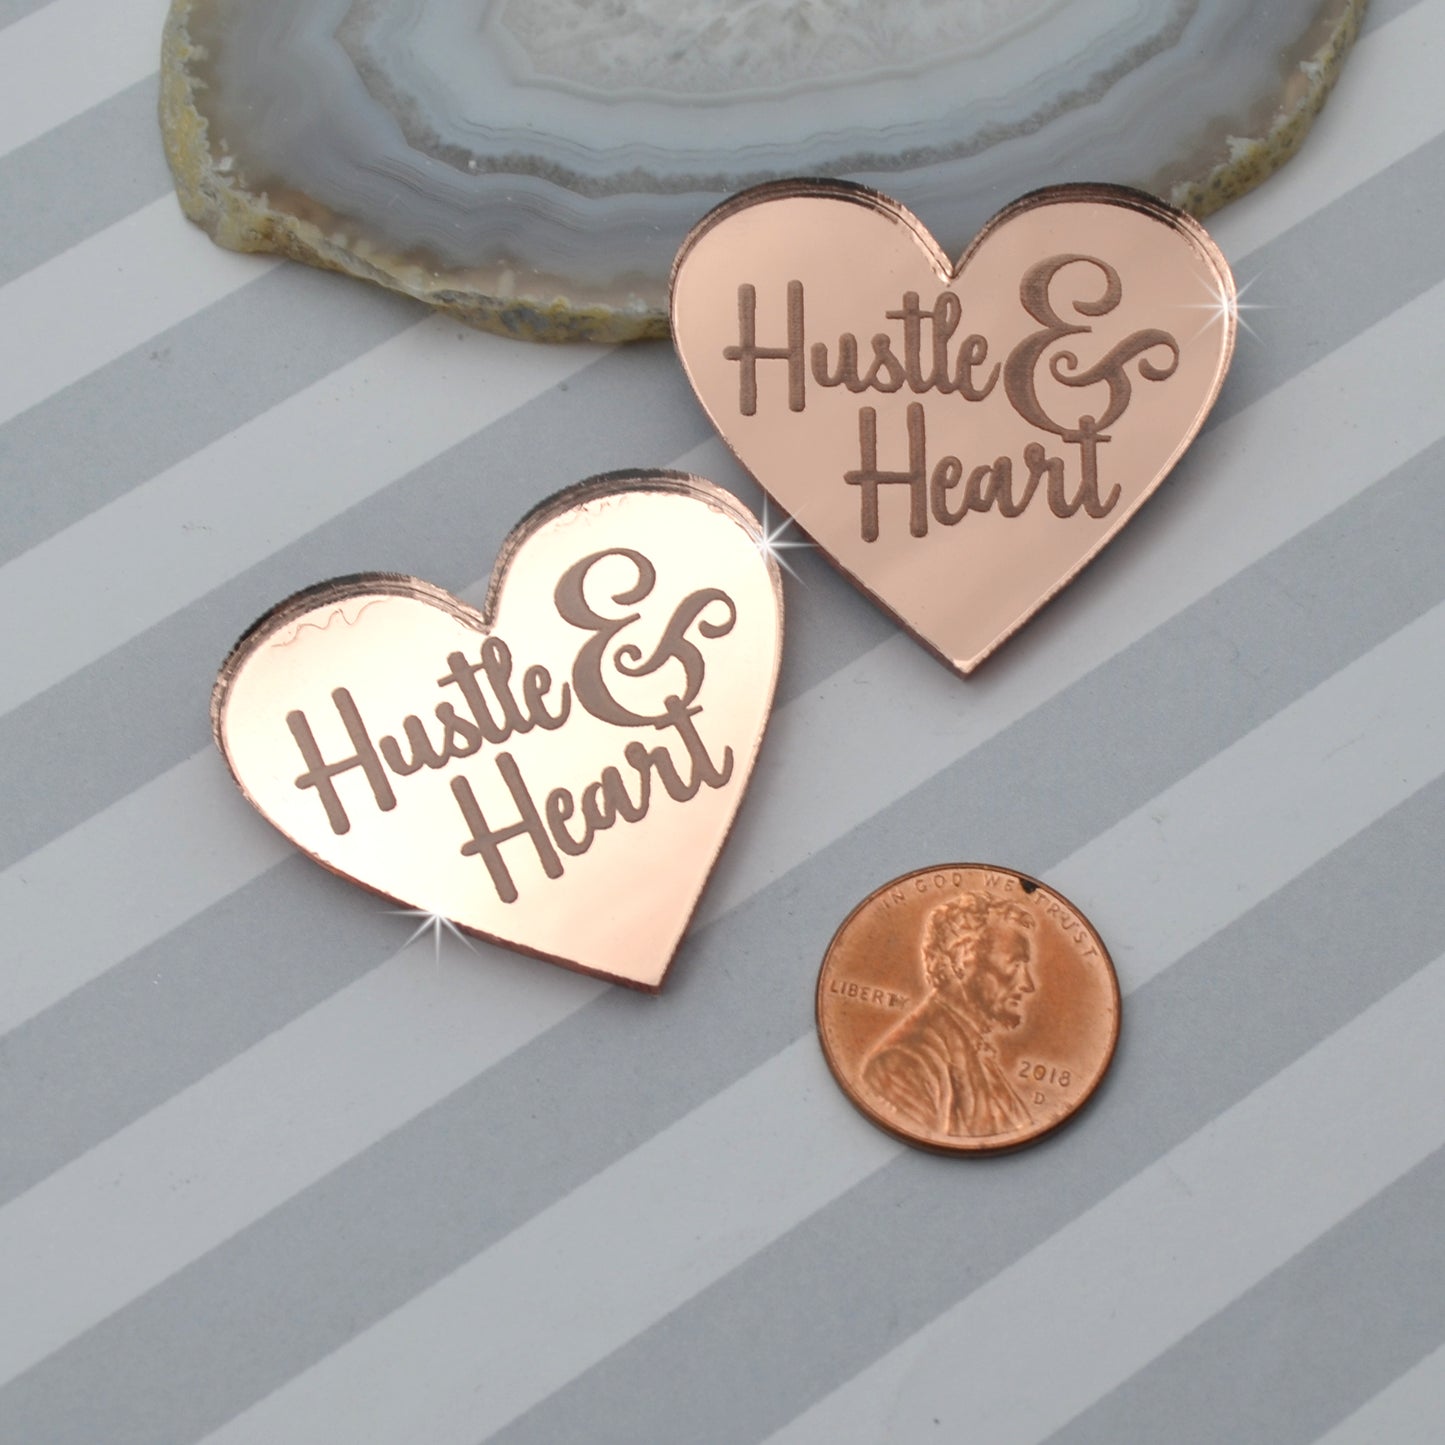 HUSTLE AND HEART - Rose Gold Mirror Laser Cut Acrylic Cabs - Set of 2 Flatback Cabochons